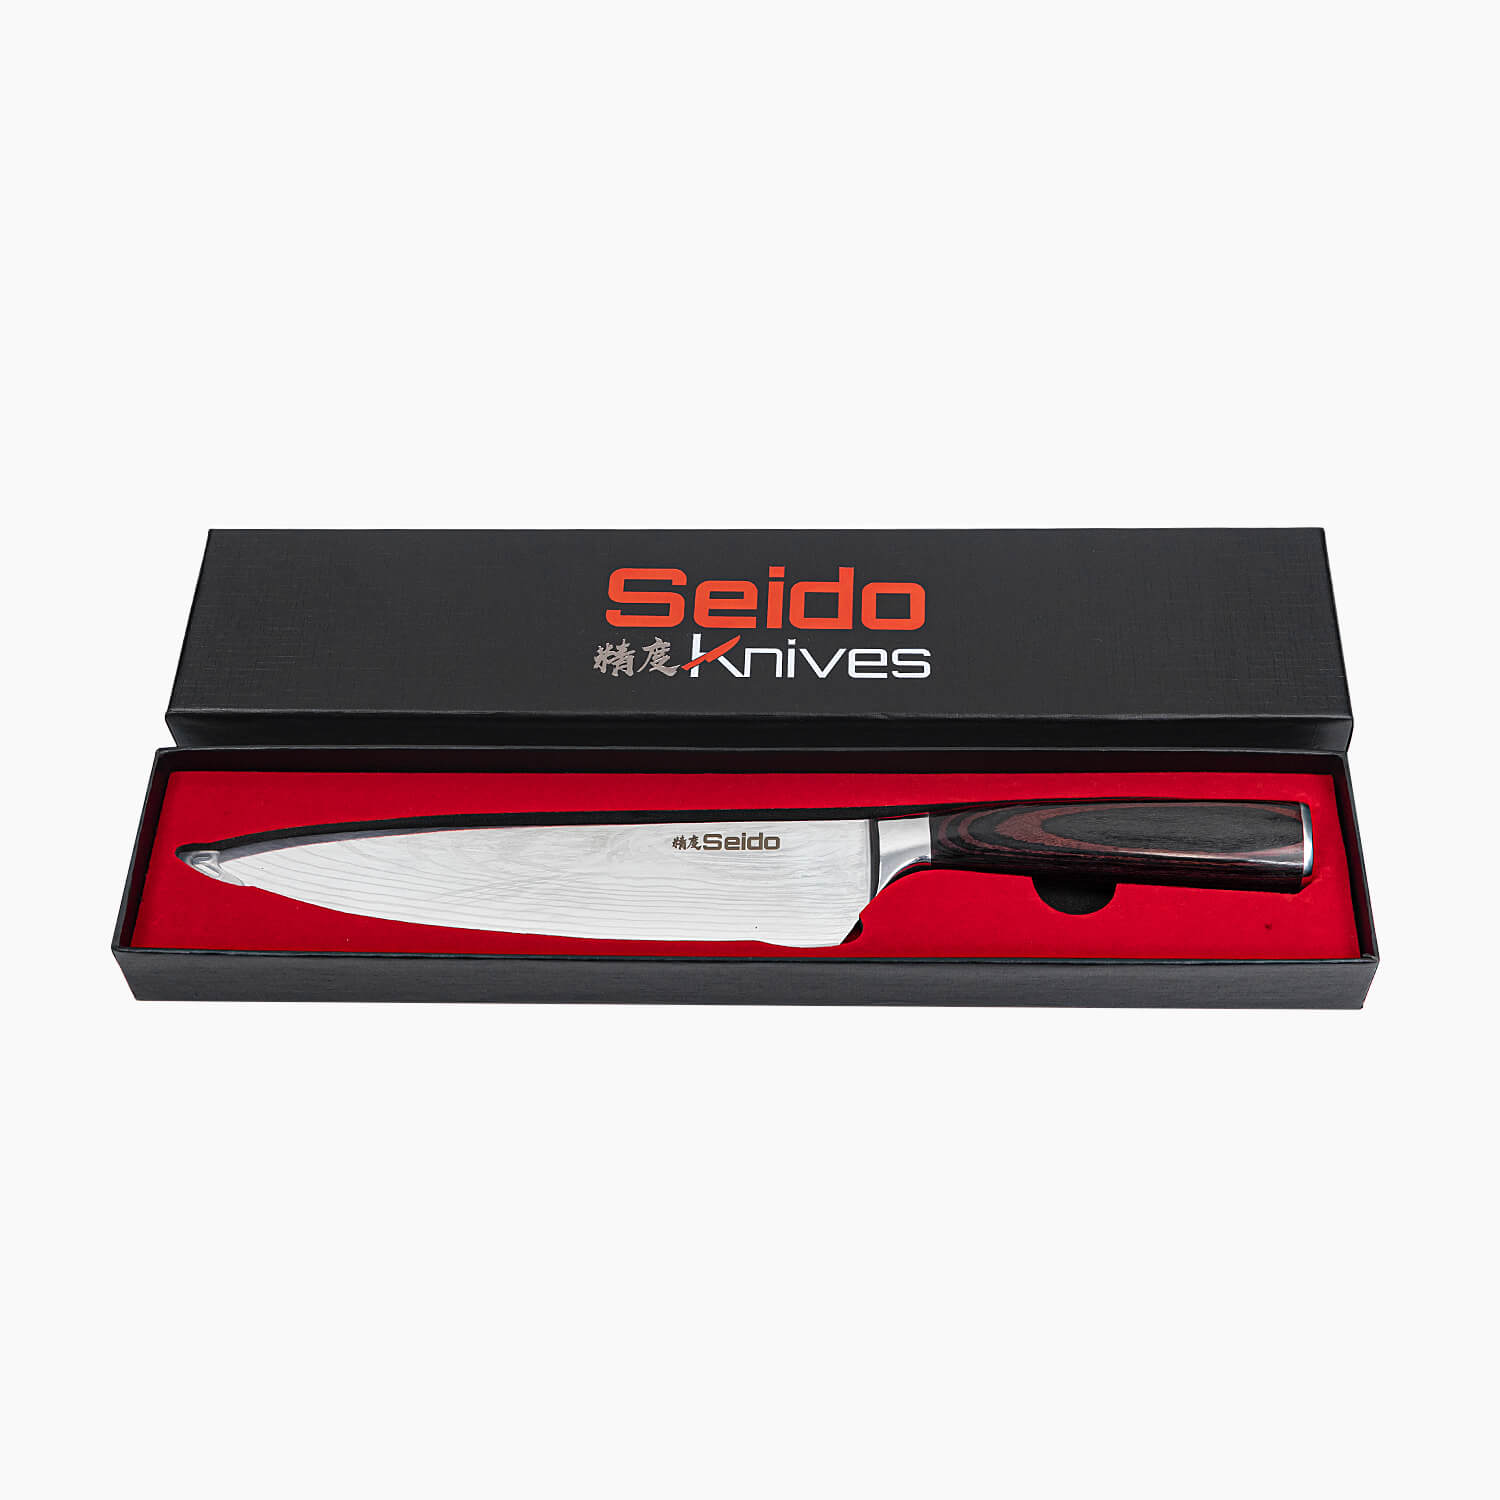 A sleek Japanese Master Chef Knife from Seido Knives, elegantly presented in a black box with vibrant red packaging.